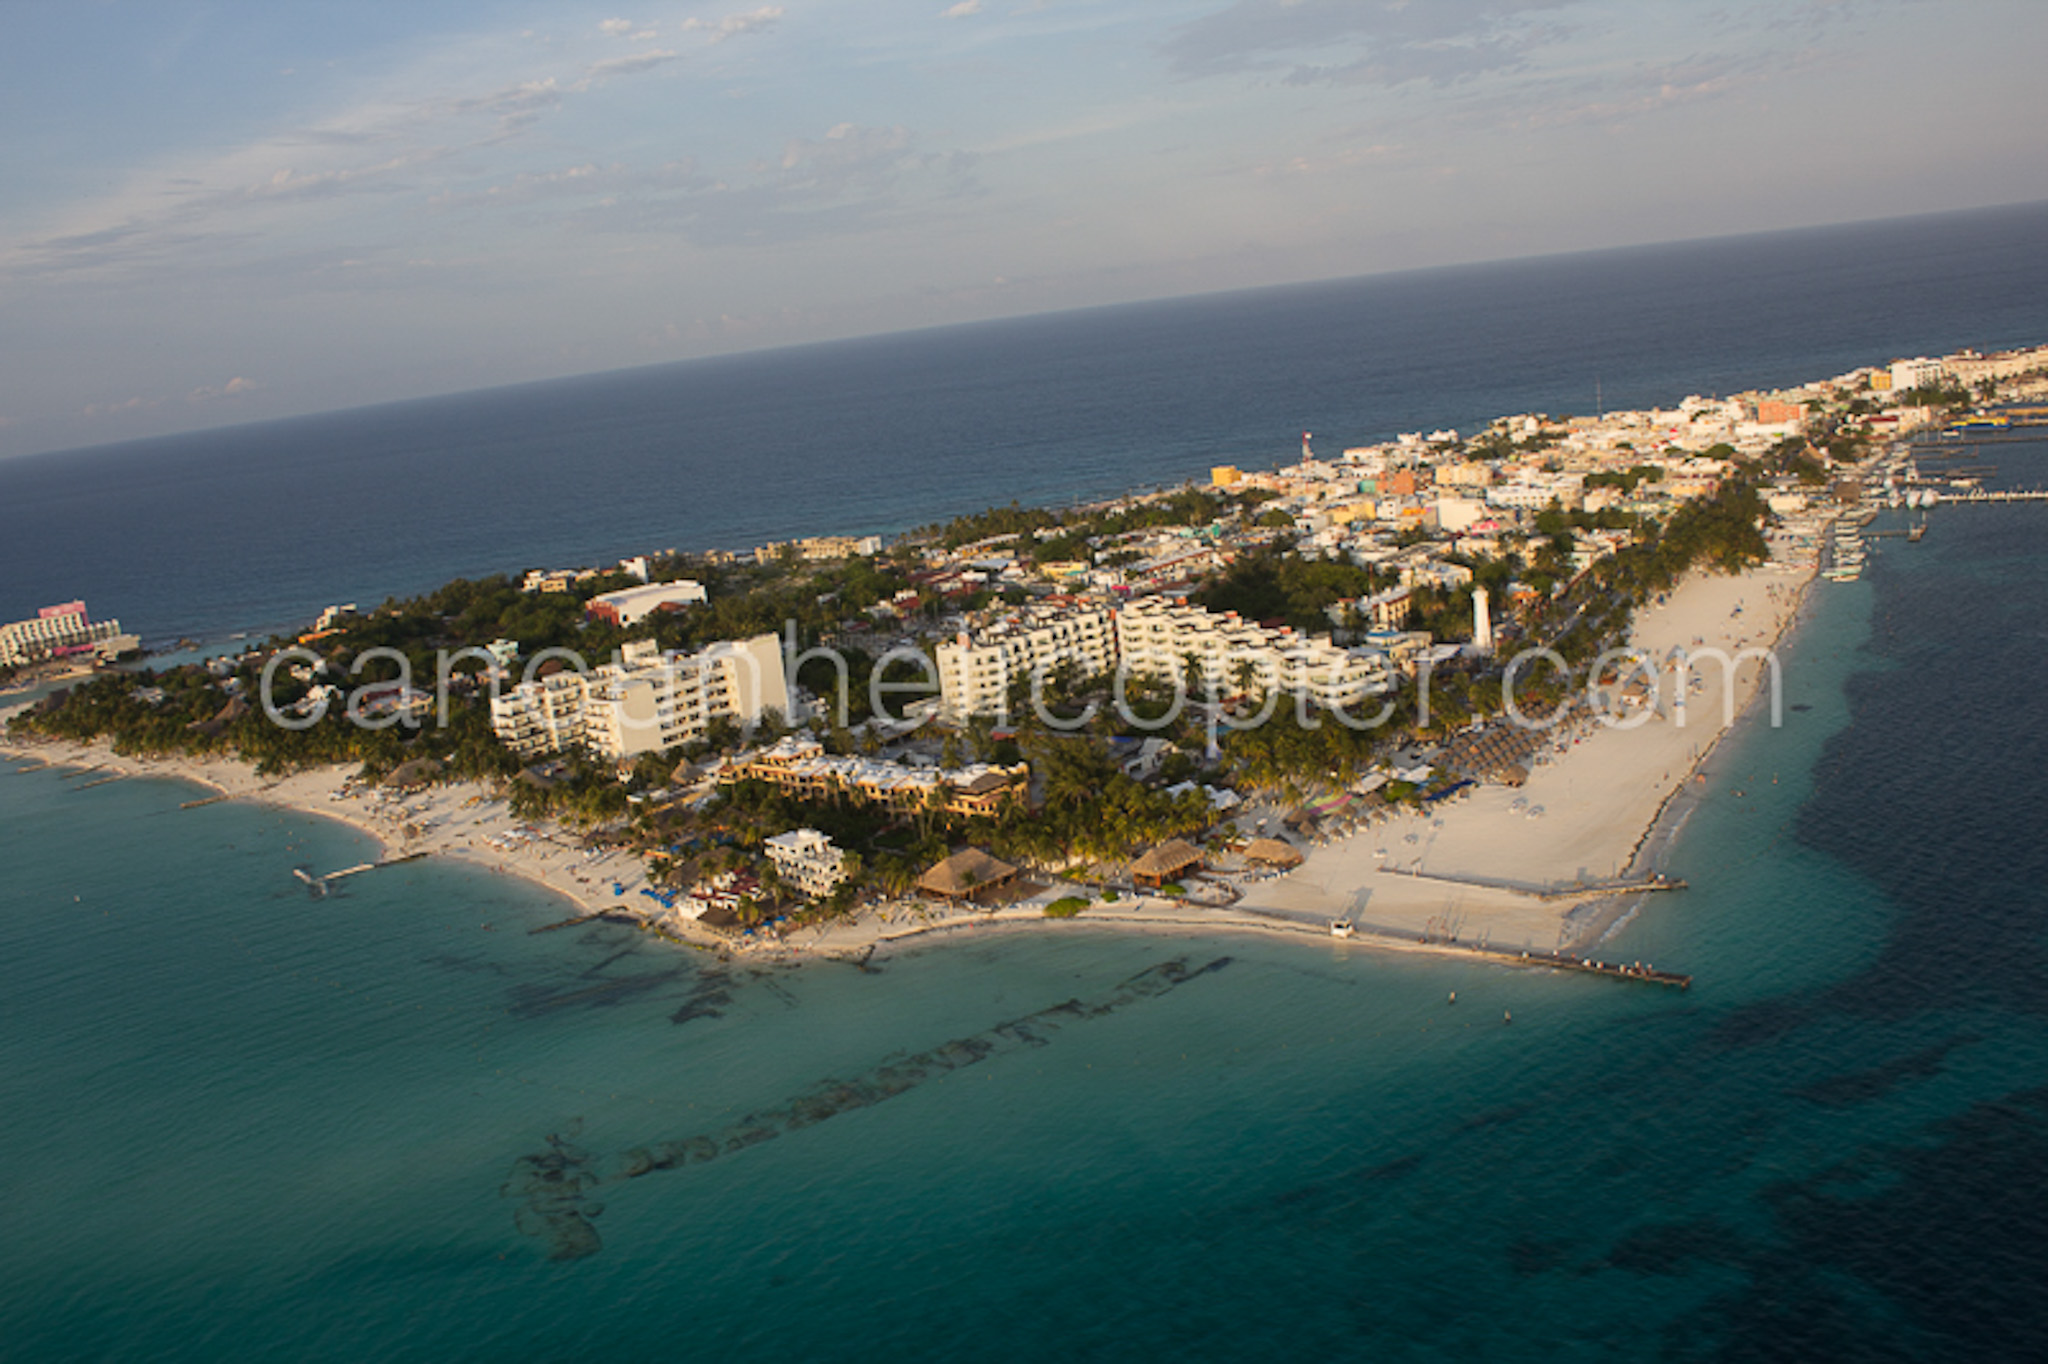 Cancun to Isla Mujeres by CANCUN HELICOPTER